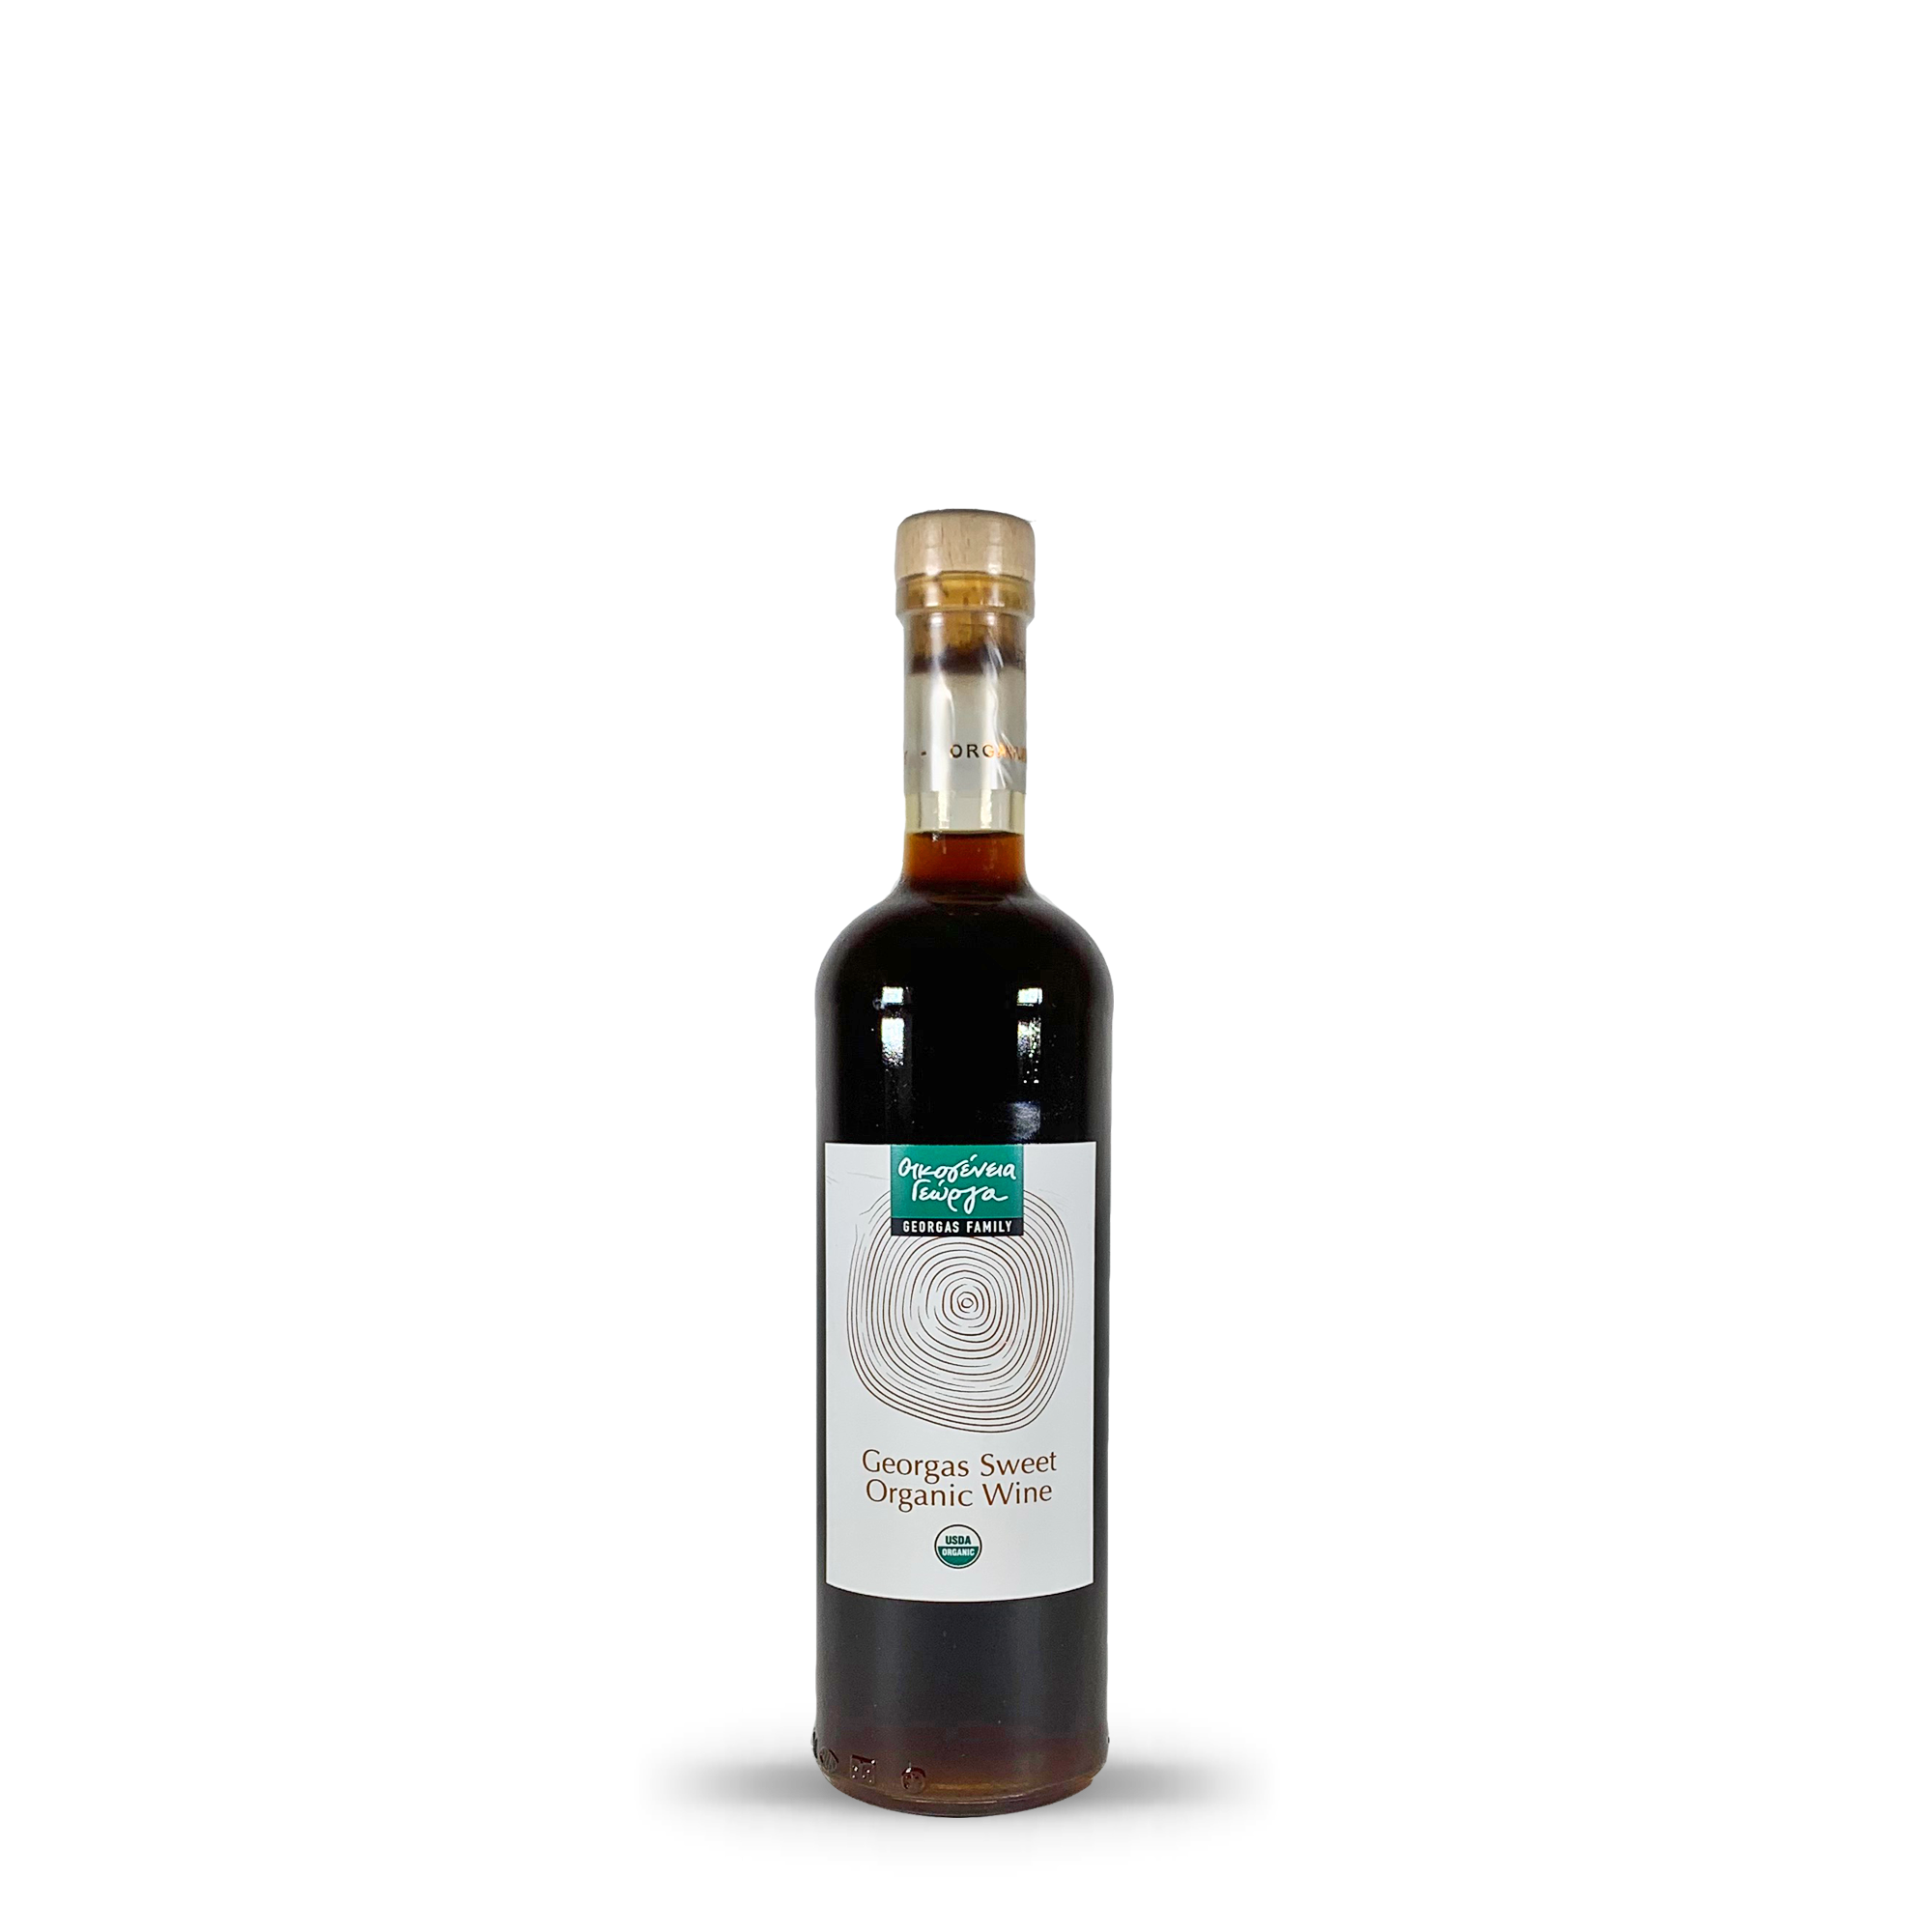 Aged Sweet White Wine 2010 - Georgas Family - Spata, Greece 50cl